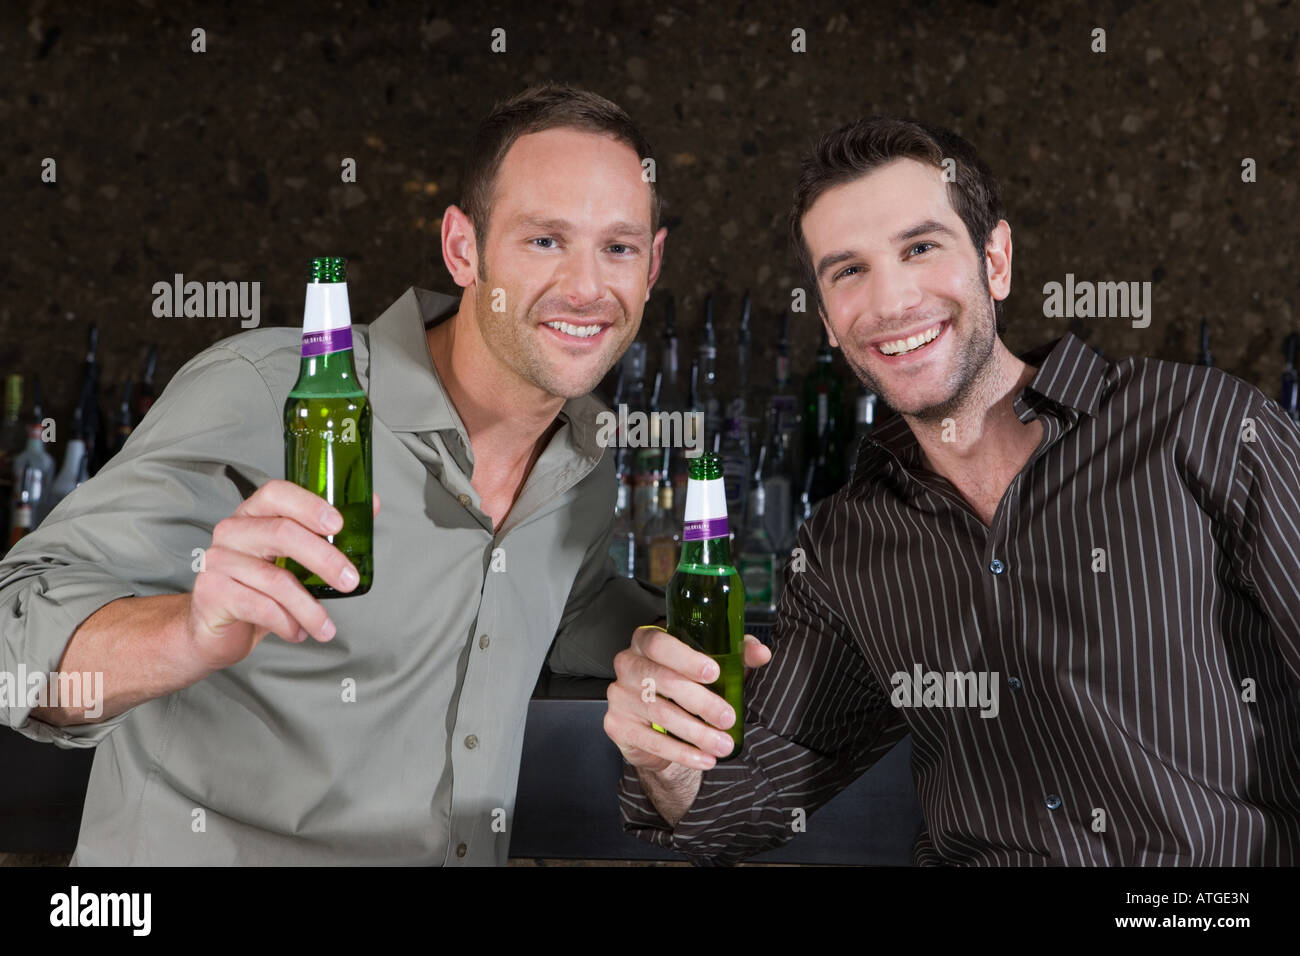 Two men drinking in a bar Stock Photo